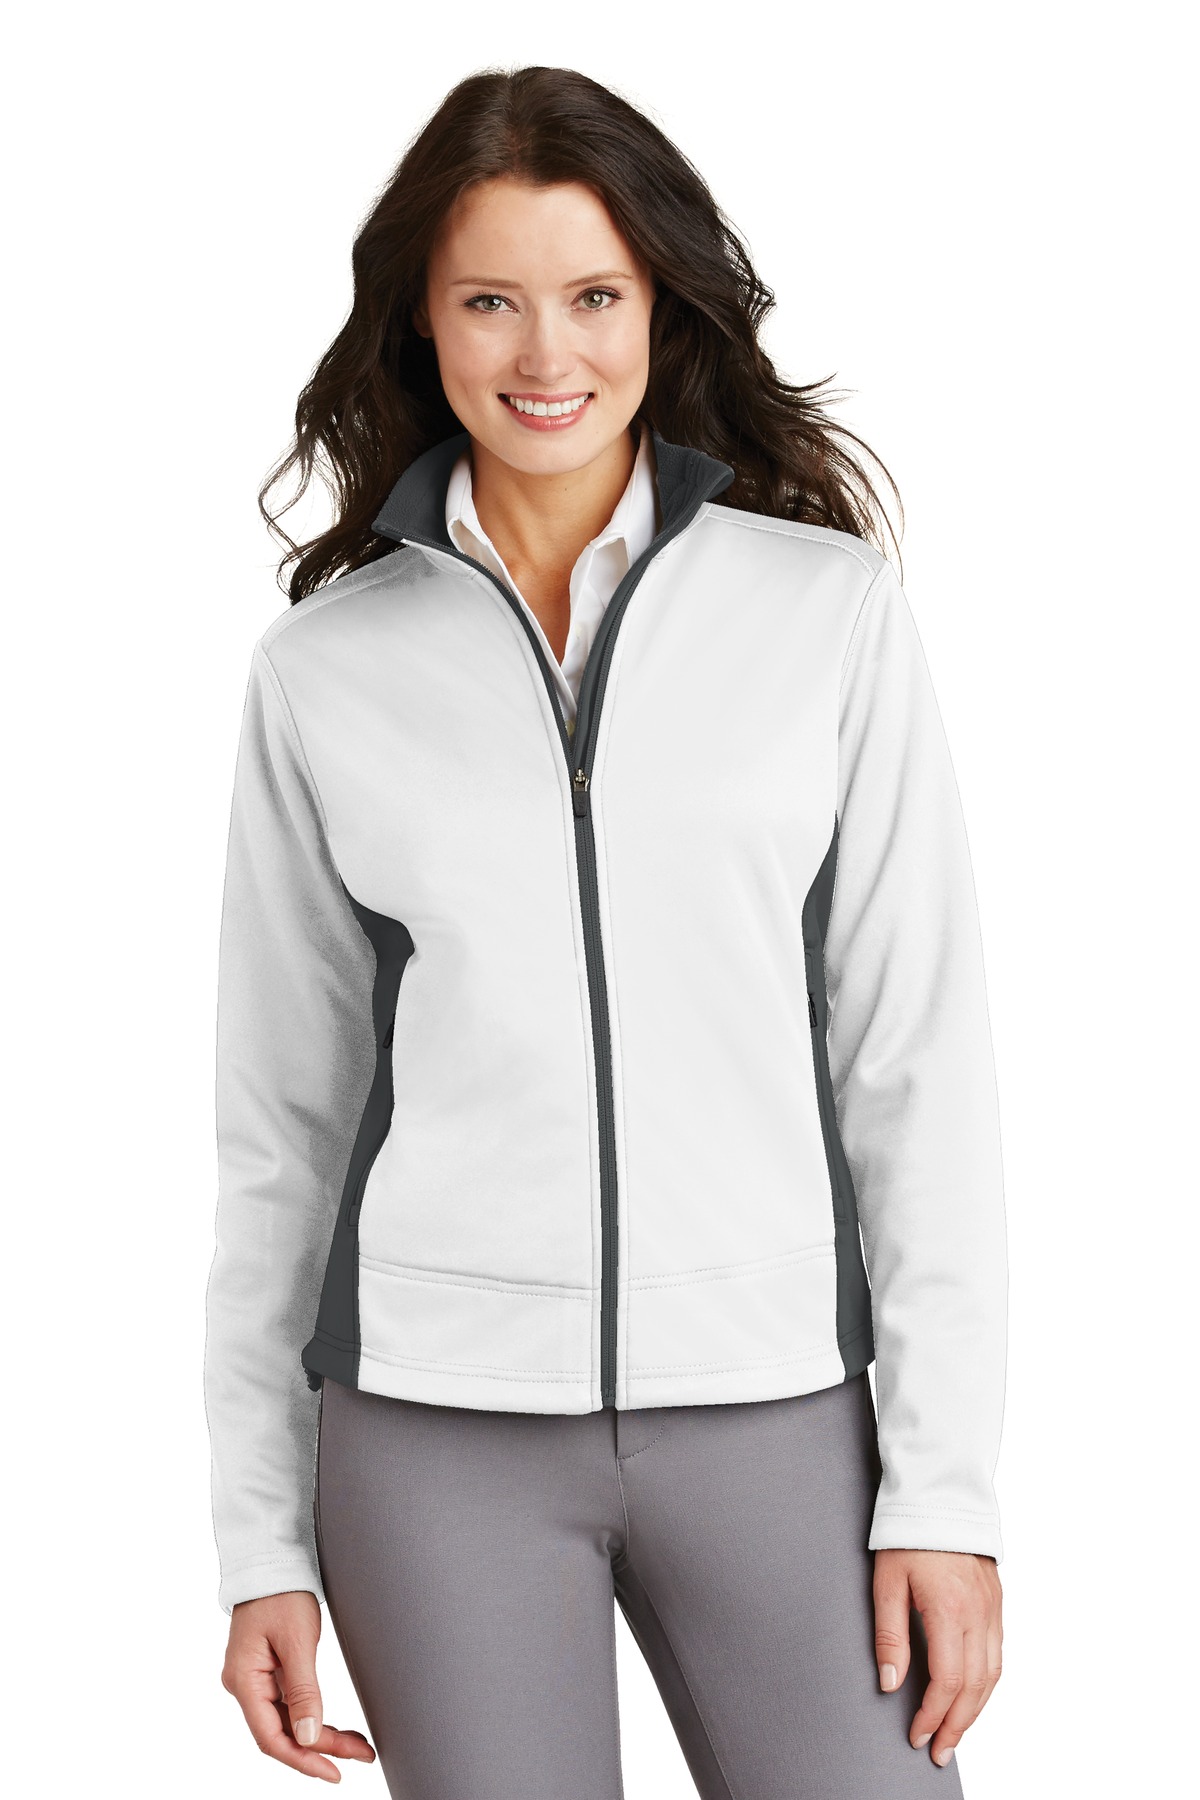 Port Authority L794 Ladies Two-Tone Soft Shell Jacket - image 2 of 2